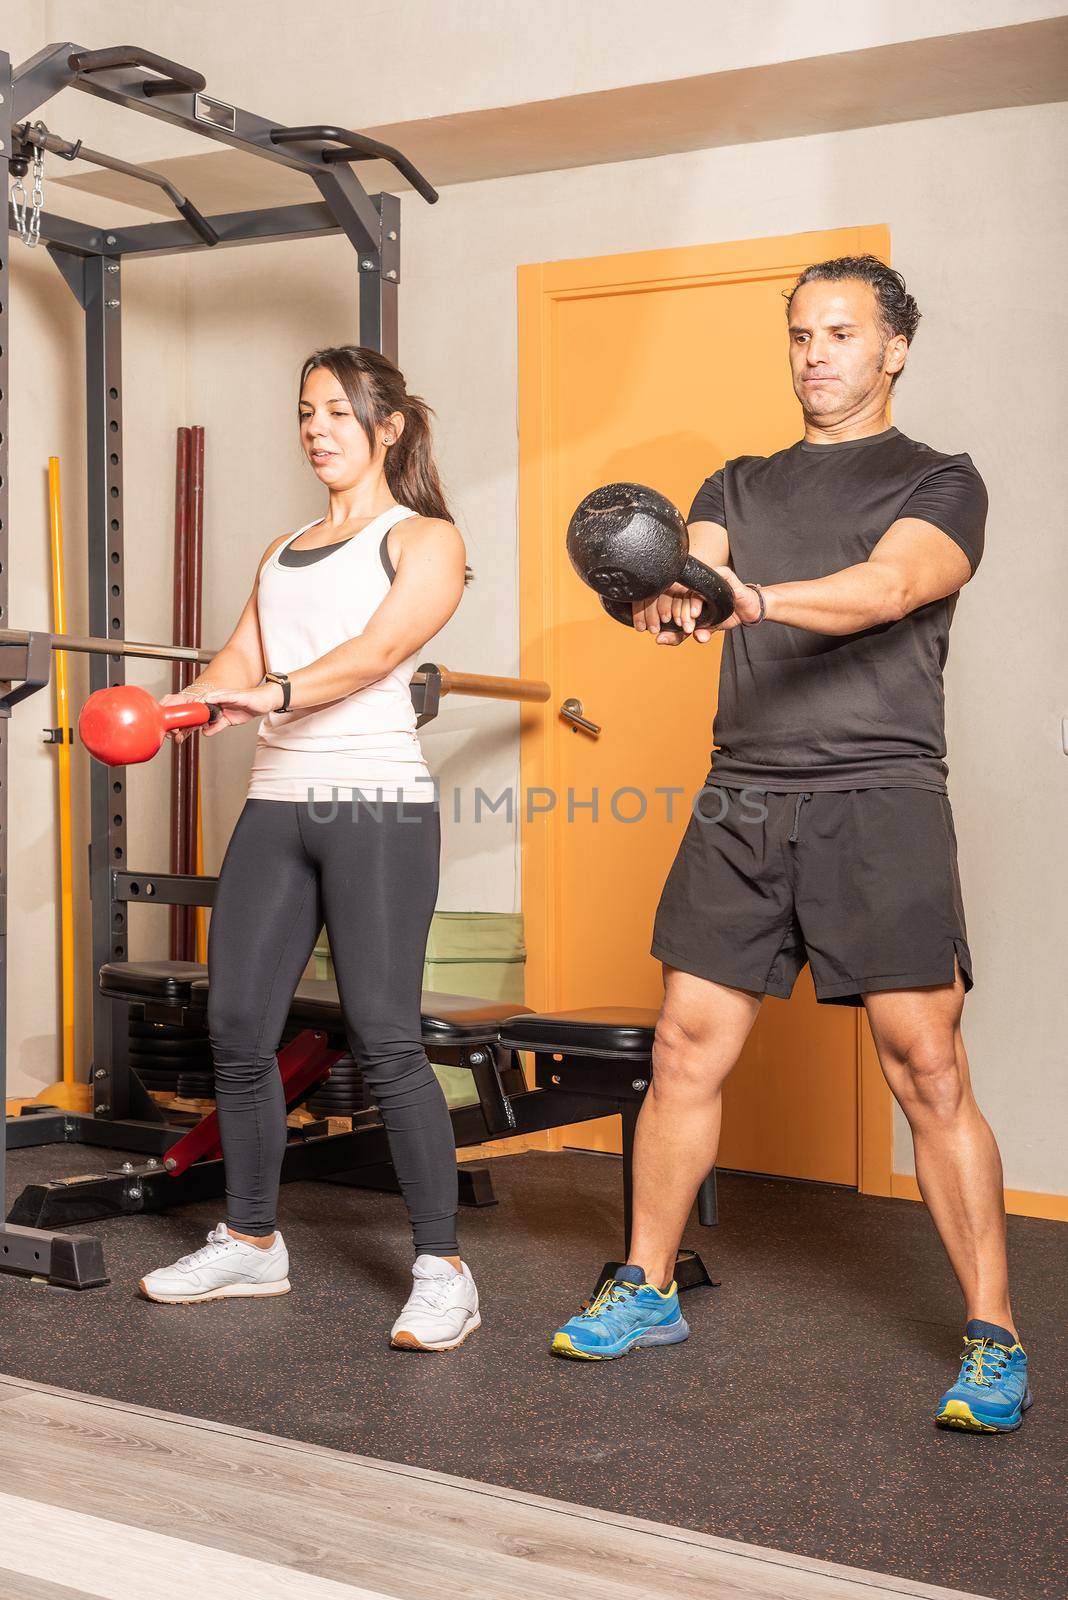 Sportswoman and man doing kettlebell swing exercise at gym. Concept of exercises with equipment in gym.